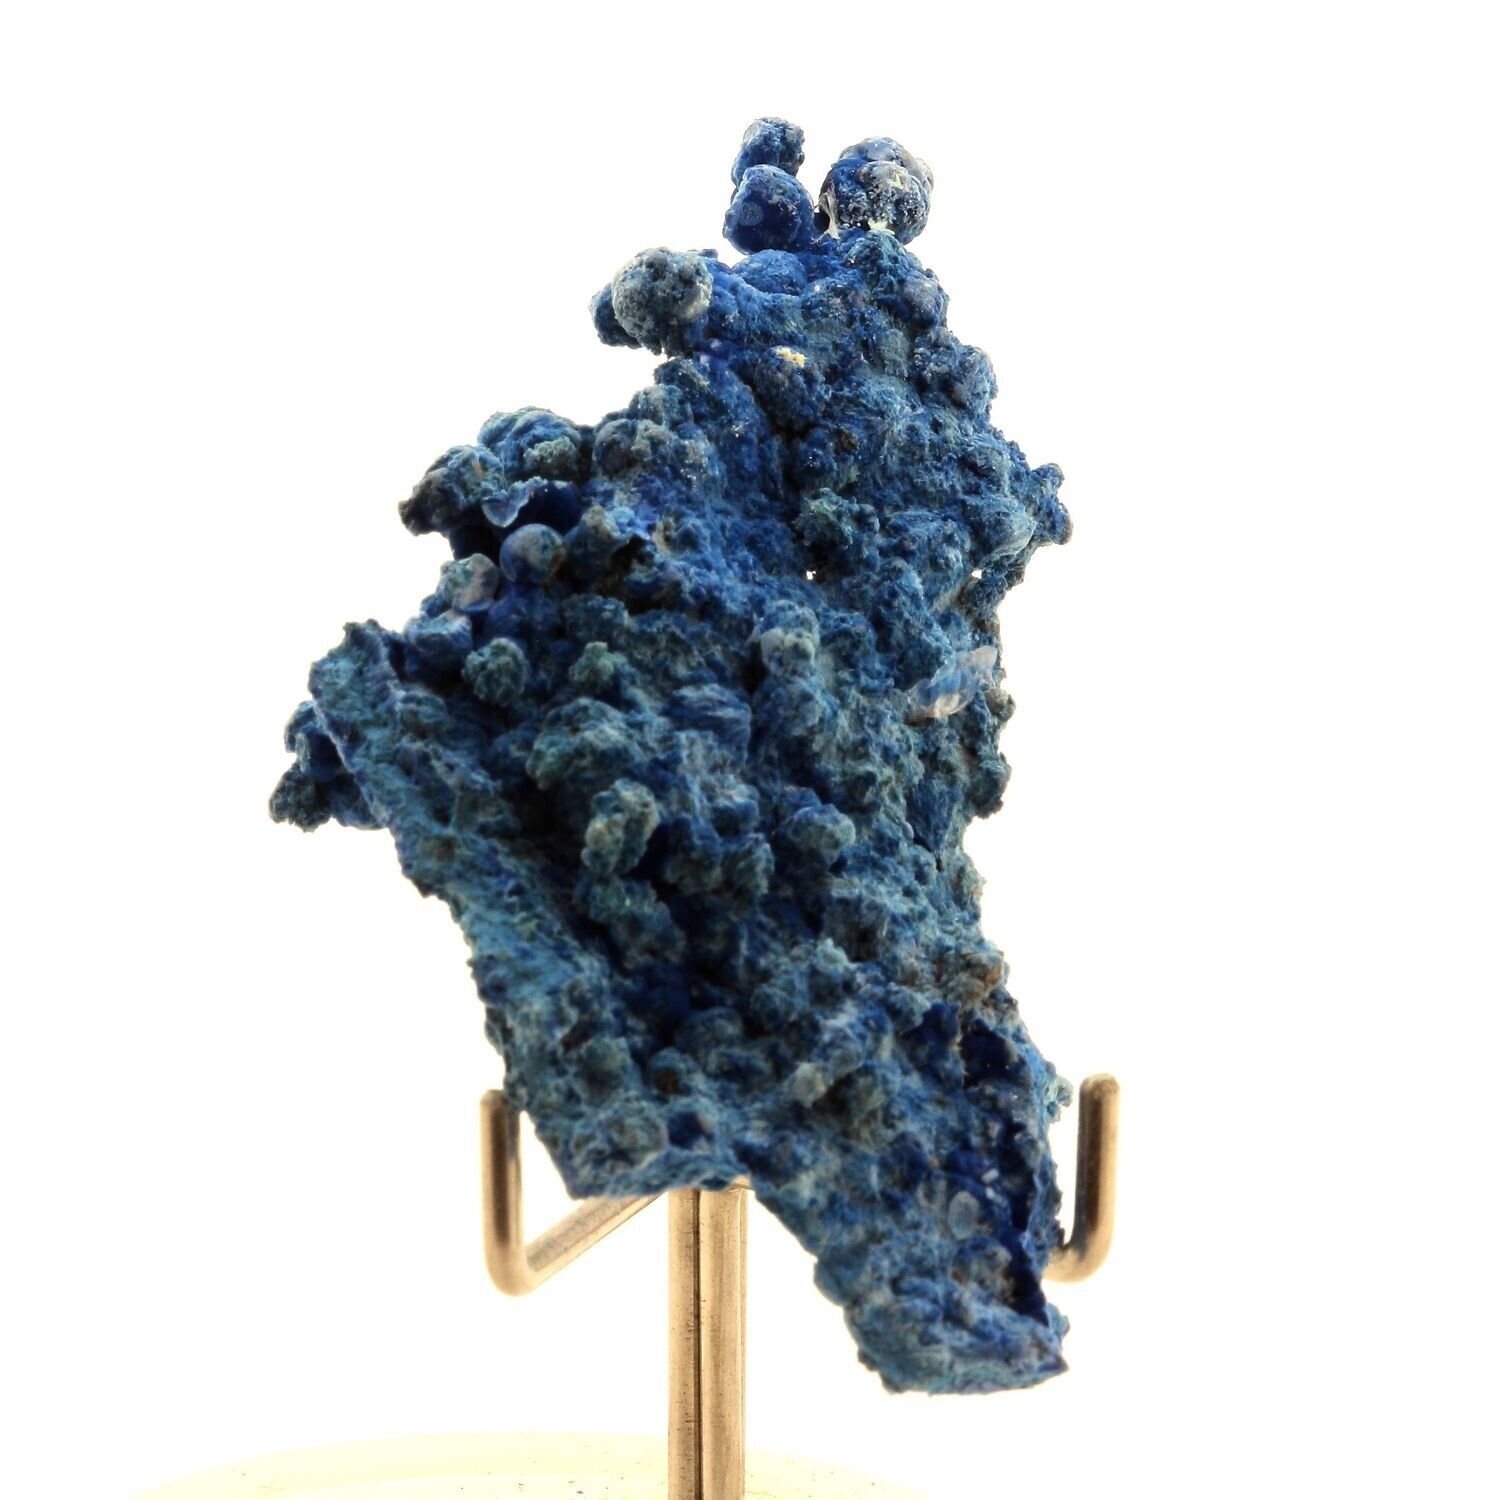 Collection Abijoux Shattuckite IN Provenance Of Milpillas Mine, Sonora, Mexican